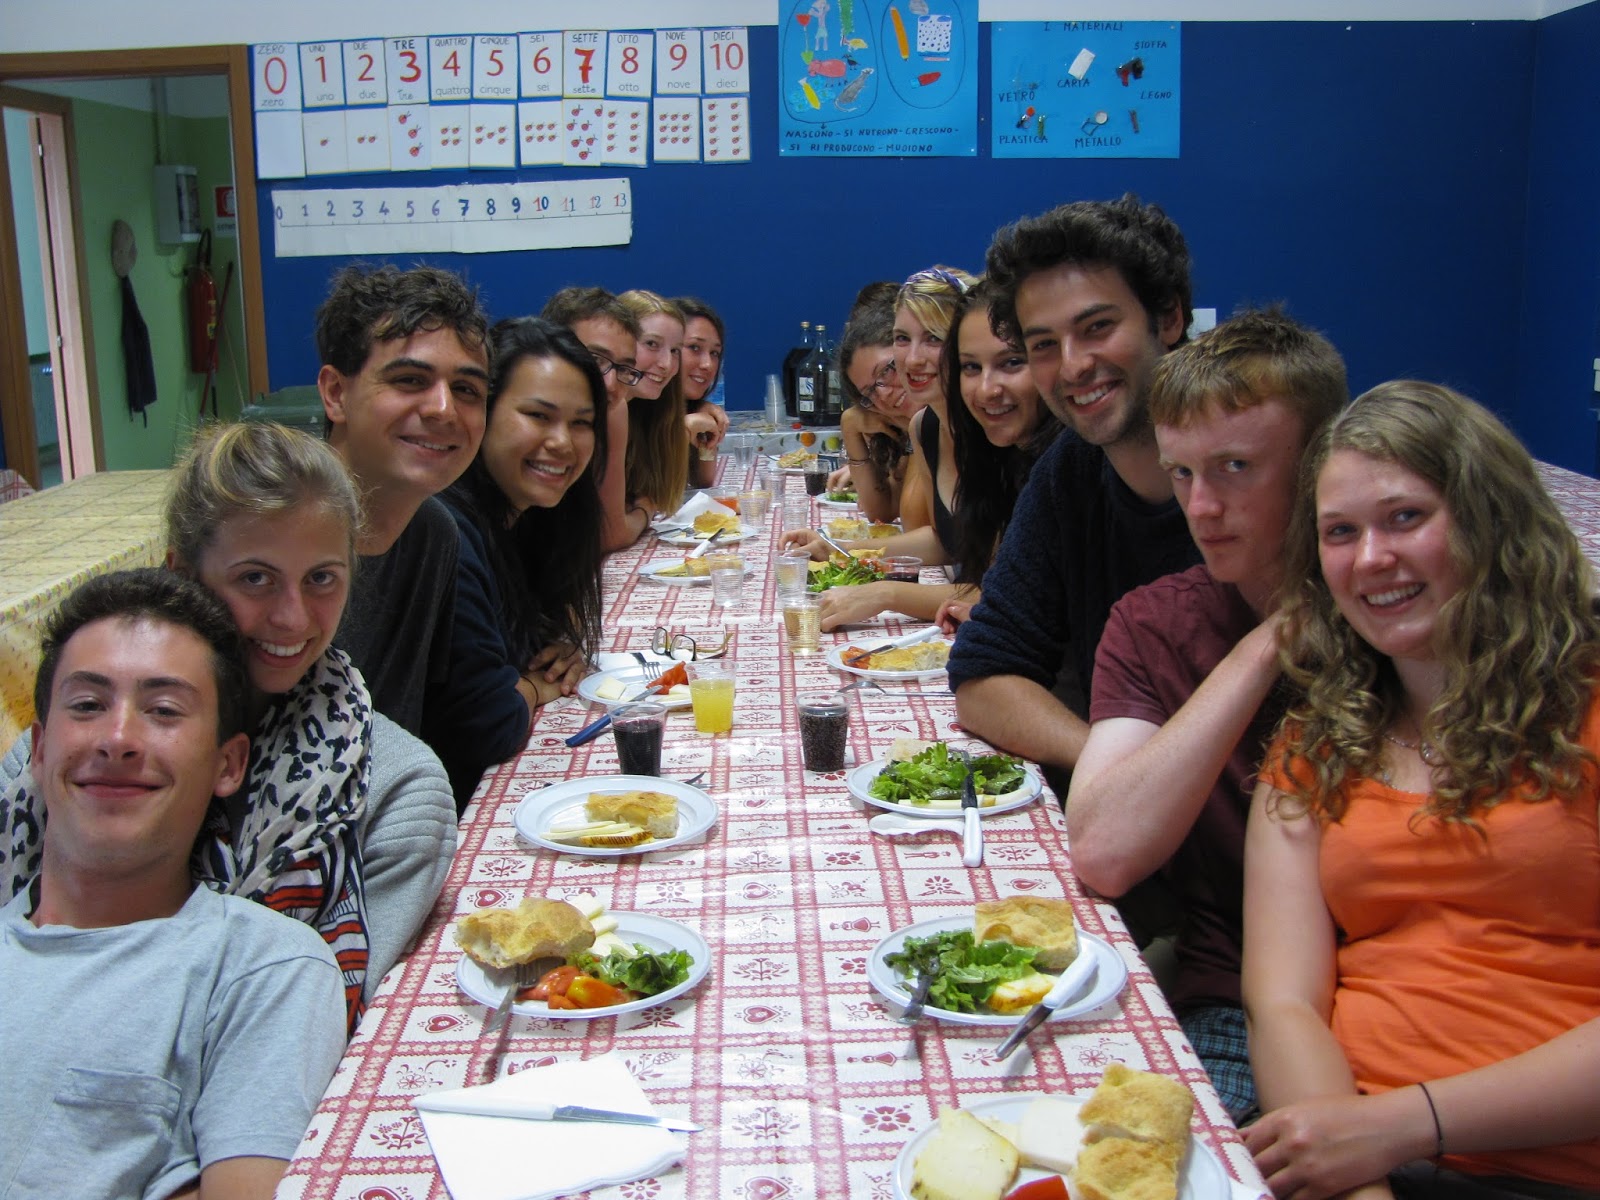 A large group has a meal at a long table.